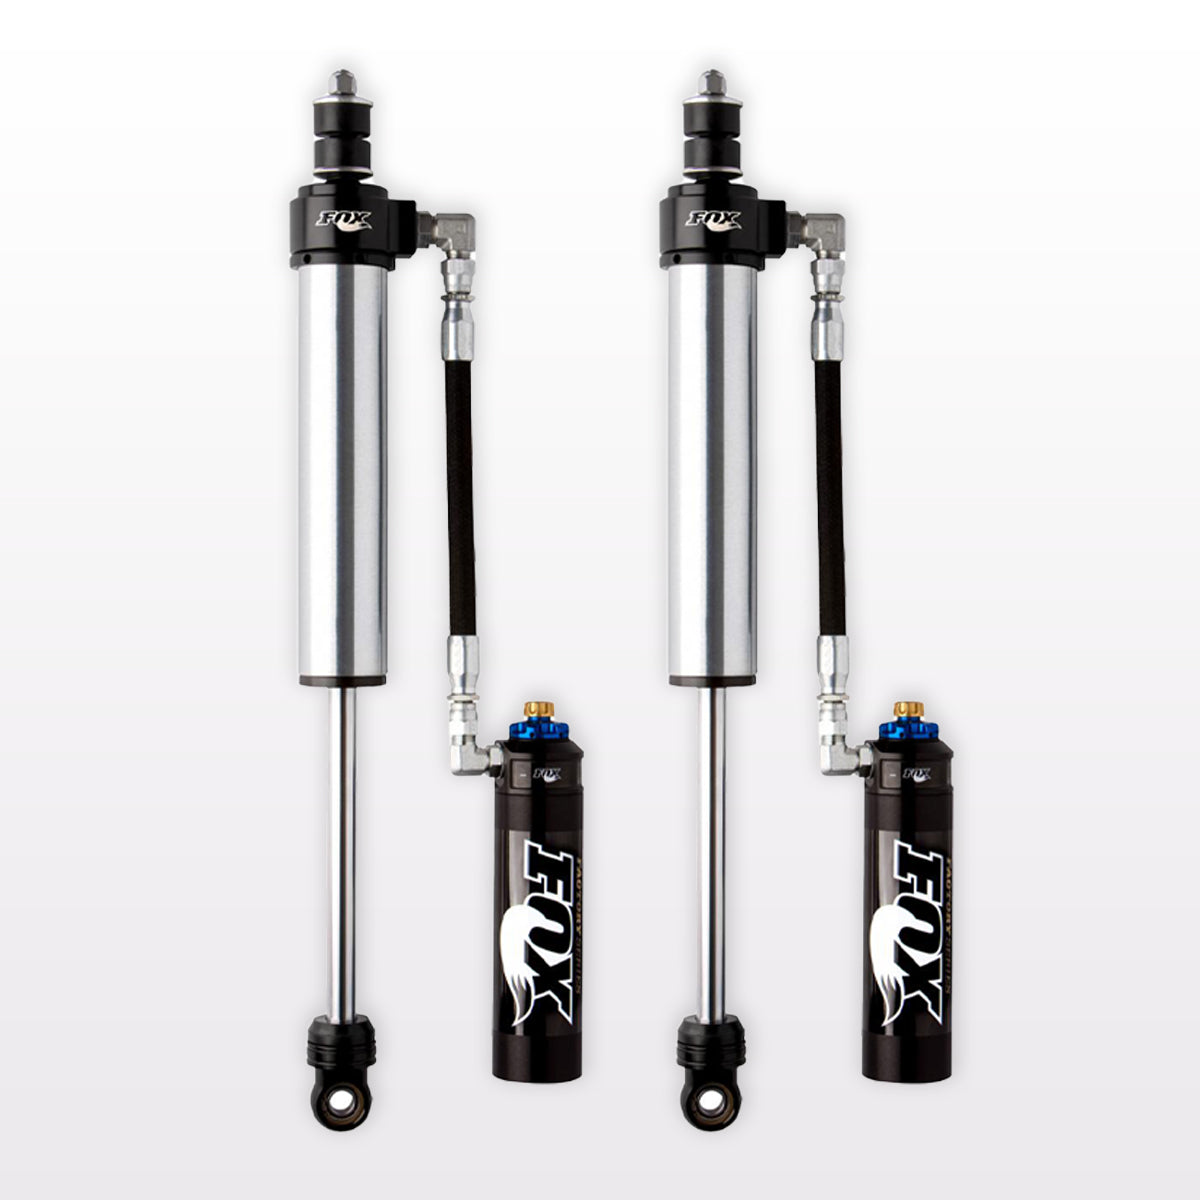 '07-21 Toyota Tundra Fox Factory Race Series 2.5 RR Coilovers & 2.5 Rear Shocks display